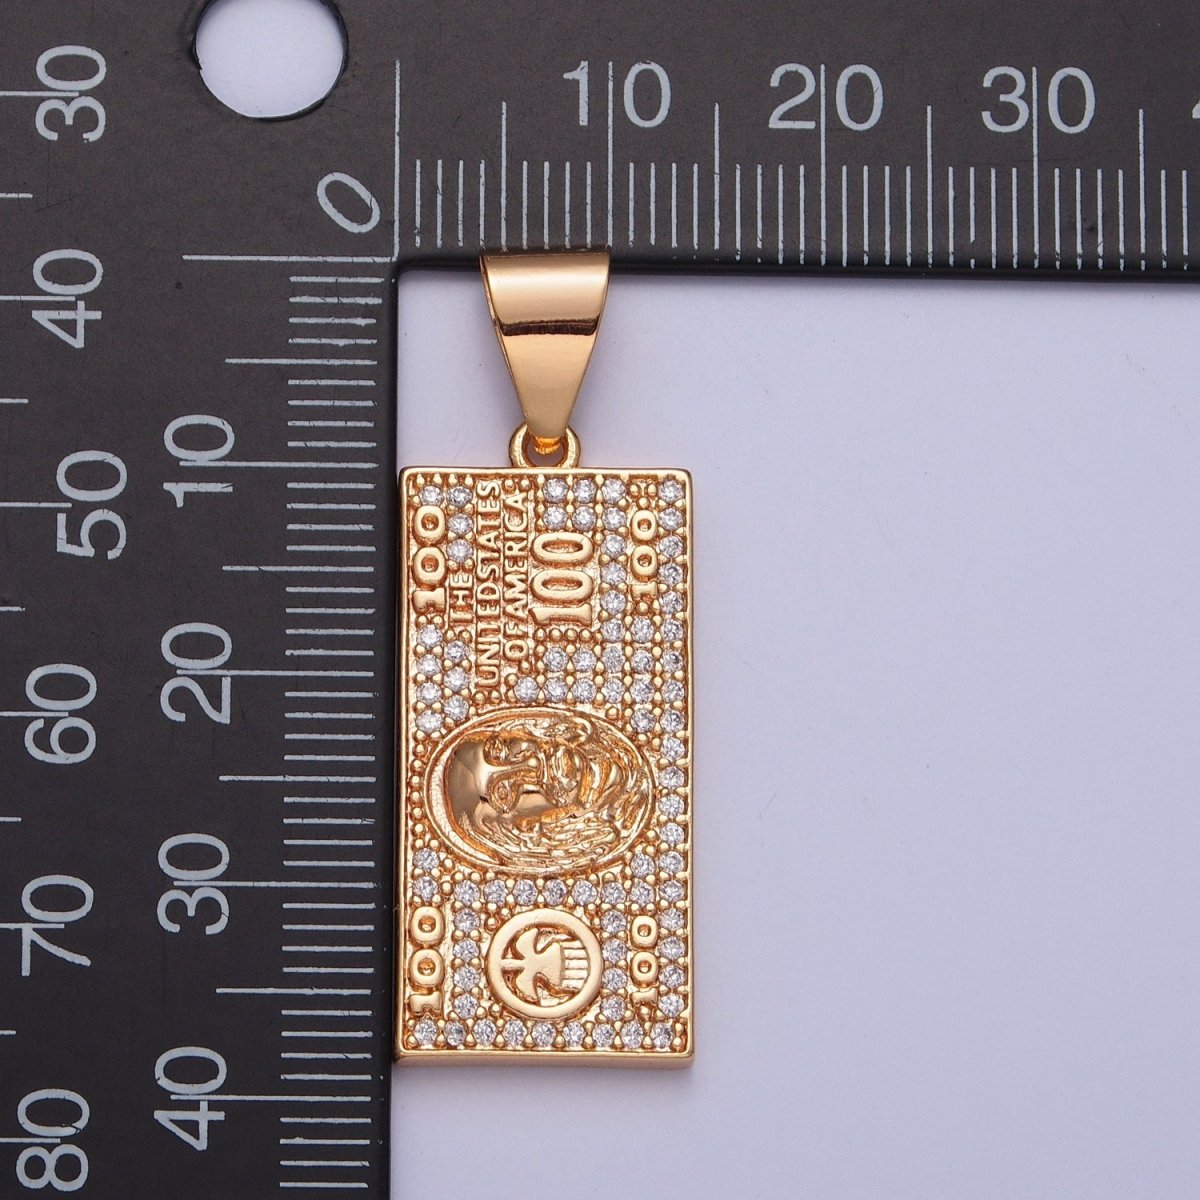 Gold Micro Pave $100 Dollar Bill, Rich Money Pendant Charm For DIY Jewelry Making J-490 - DLUXCA